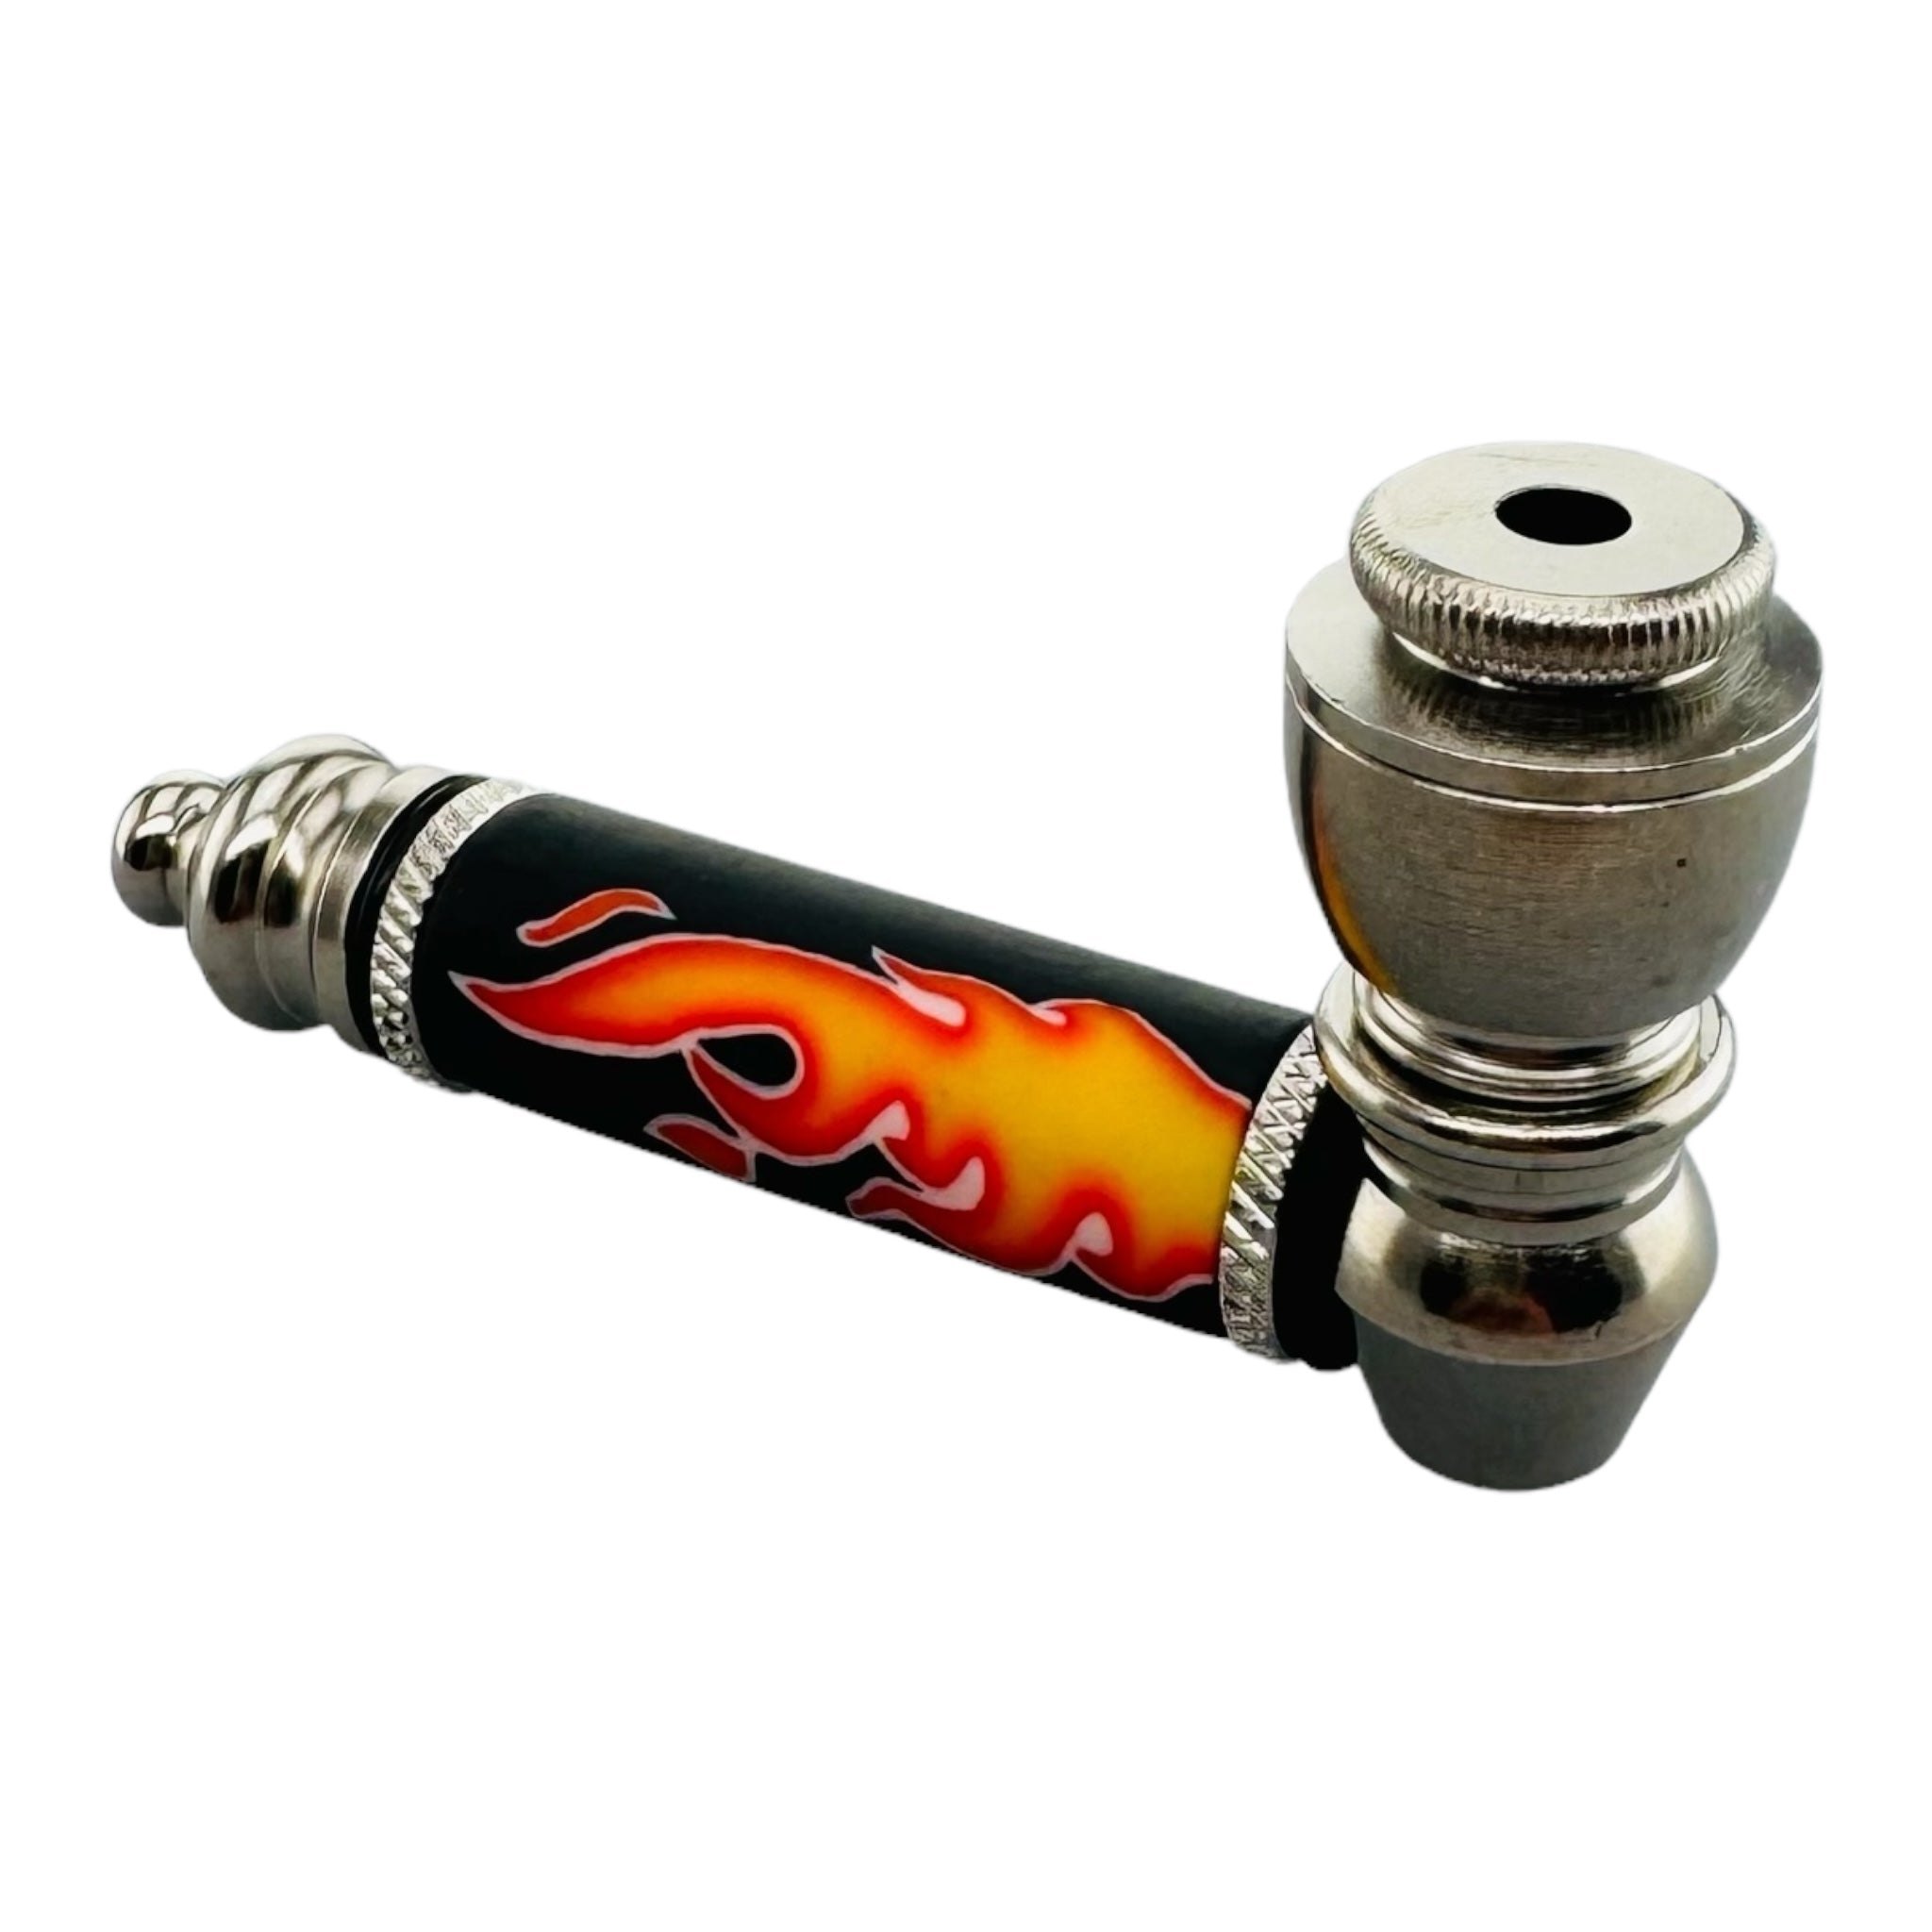 Metal Hand Pipes - Silver Chrome Hand Pipe for weed or tobacco With Flames